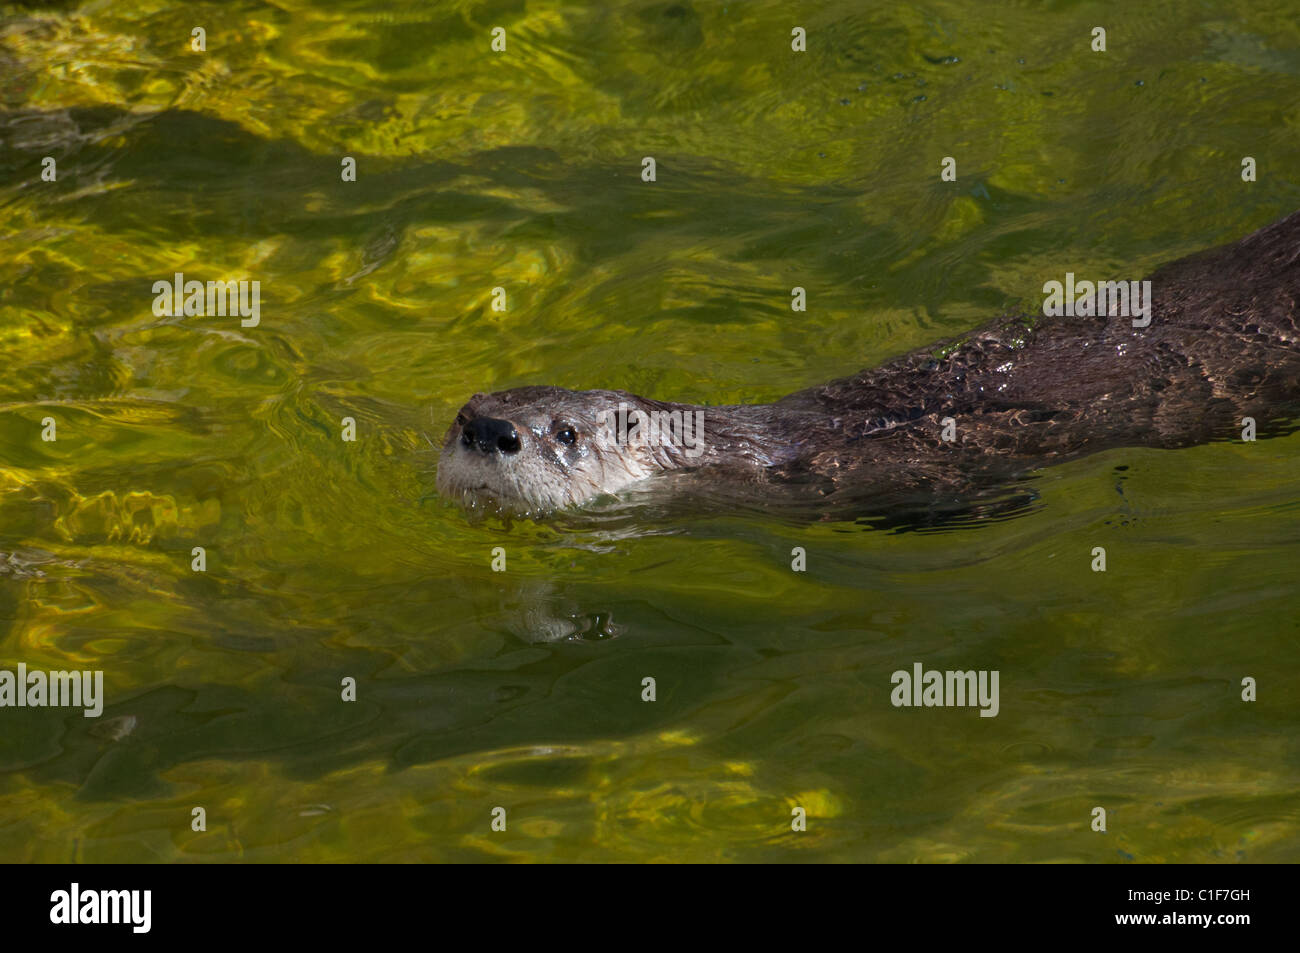 A Northern River Otter swimming. Stock Photo